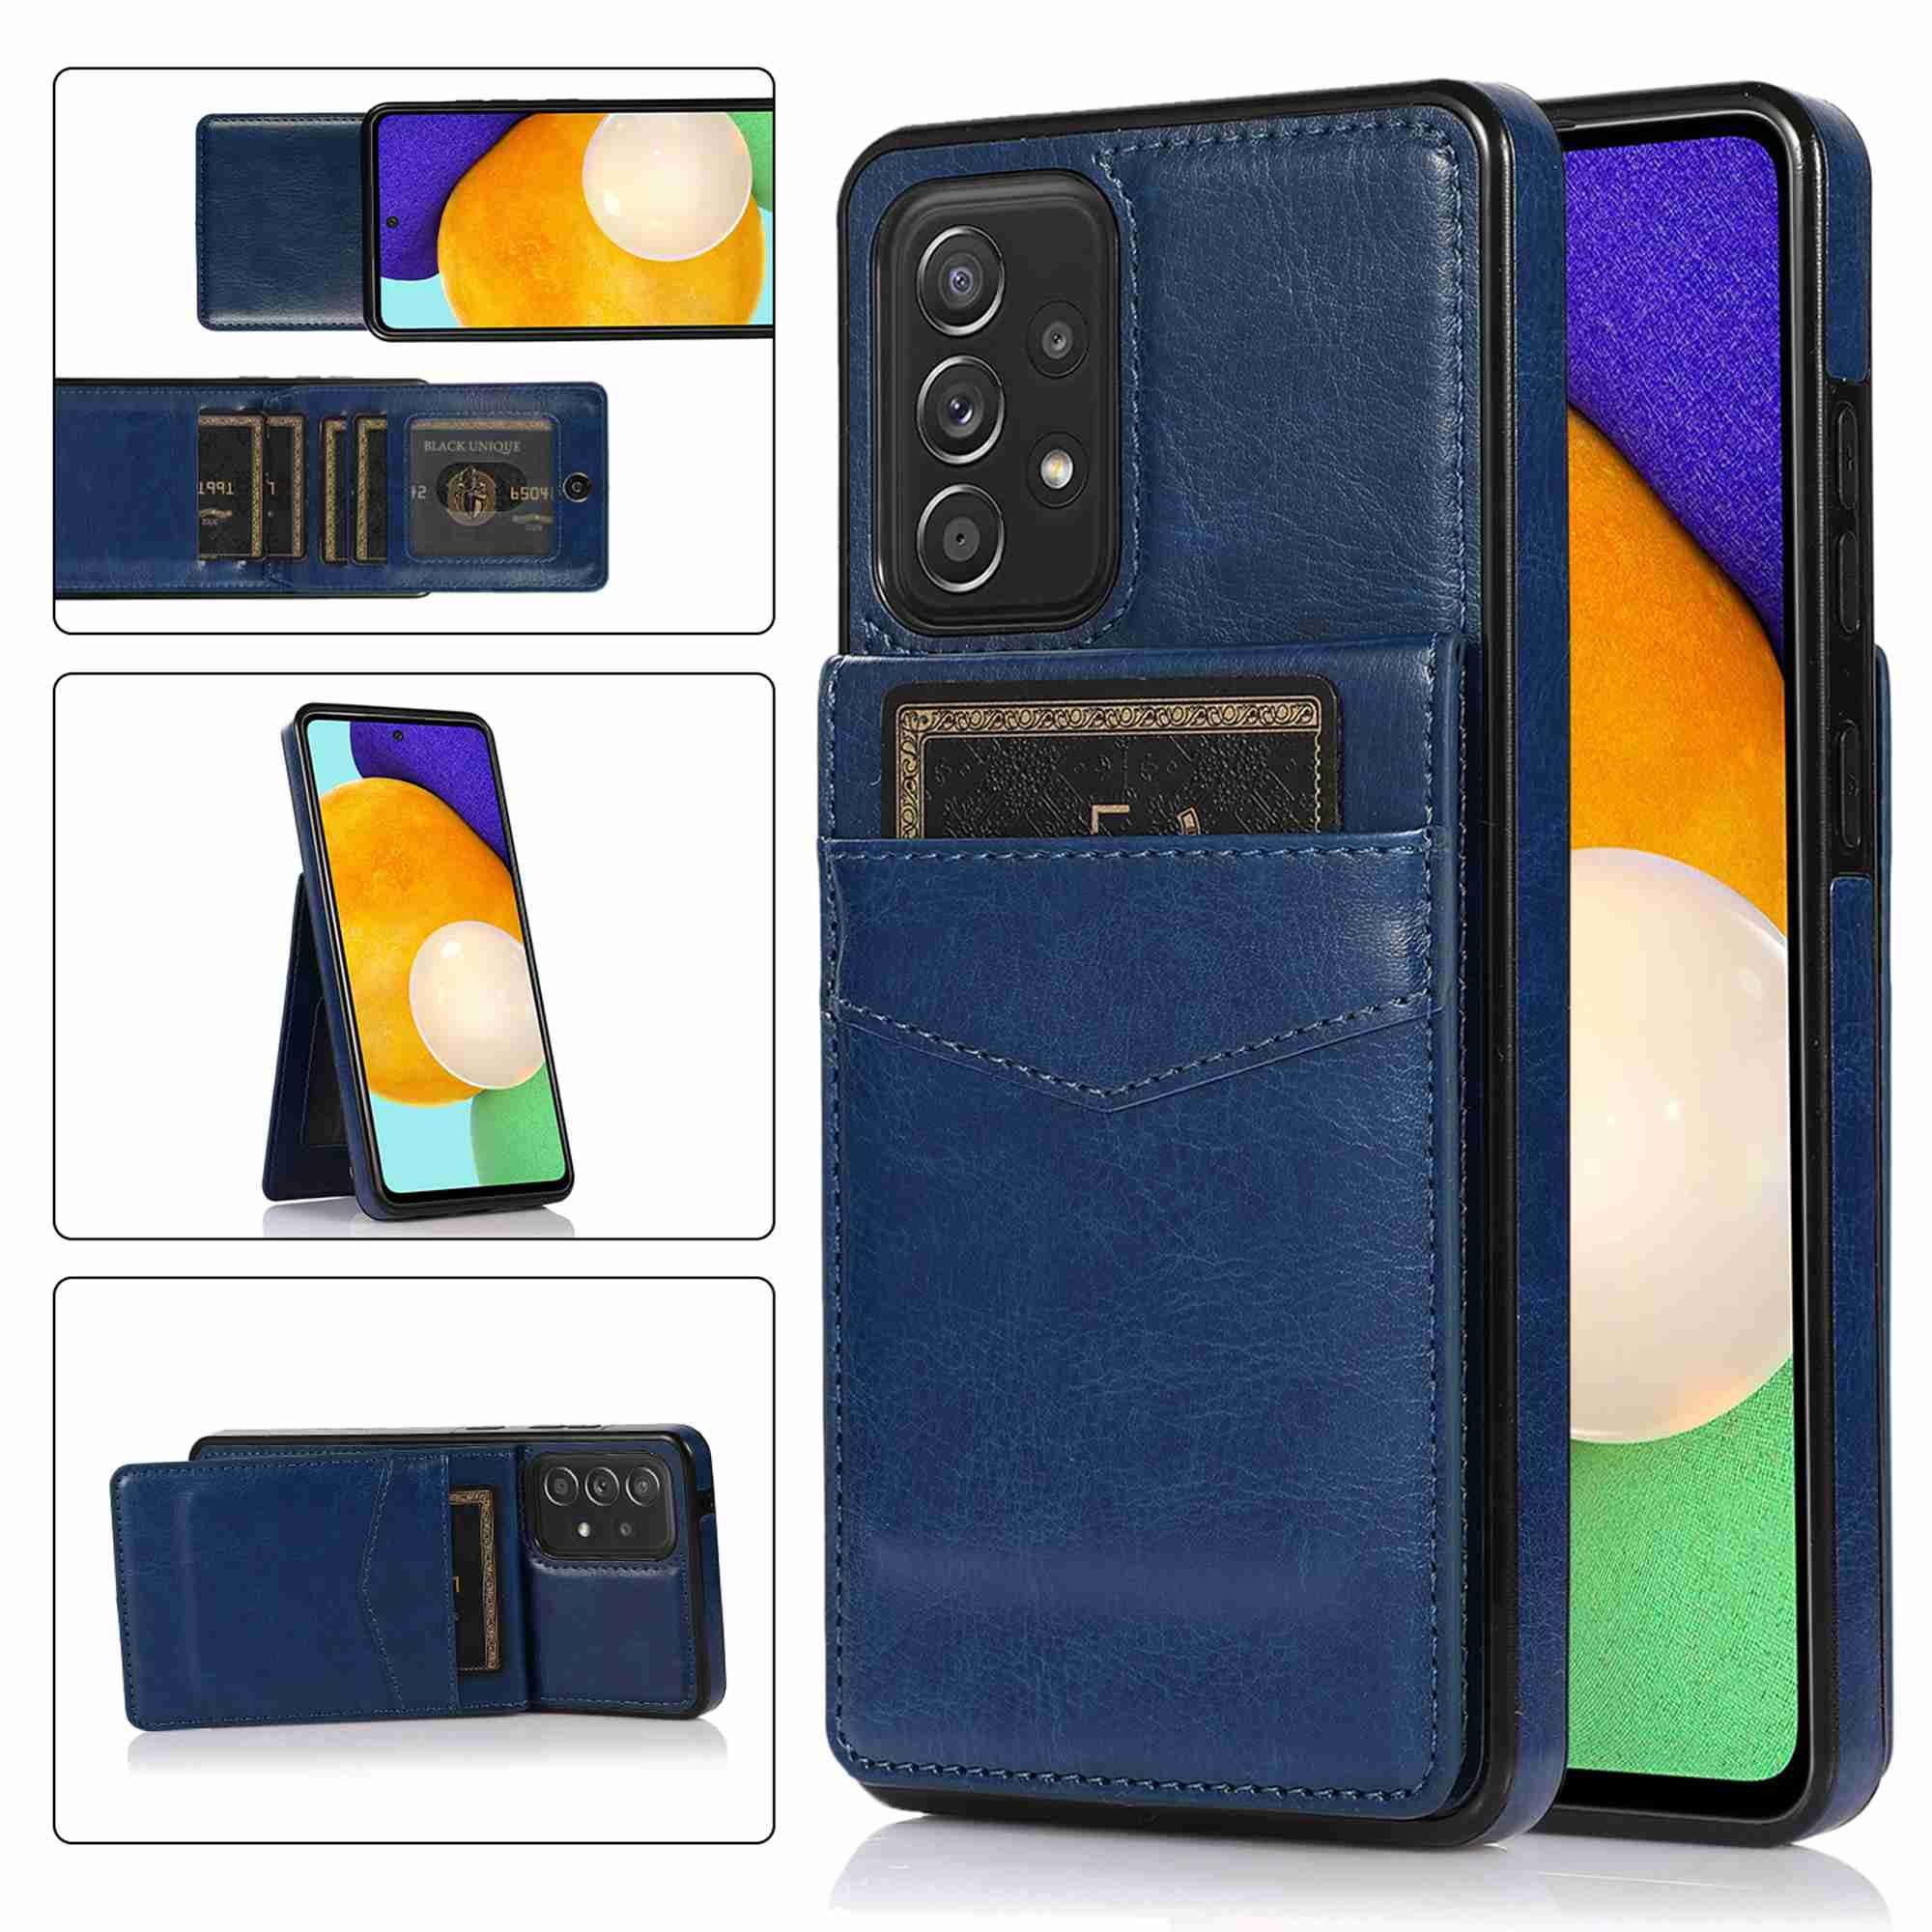 Black Samsung A52 5g Case Wallet,Glitter Zipper Leather Shockproof Protective Cover for Women with Card Holder Stand Flip Magnetic Phone Case for Samsung A52 5G